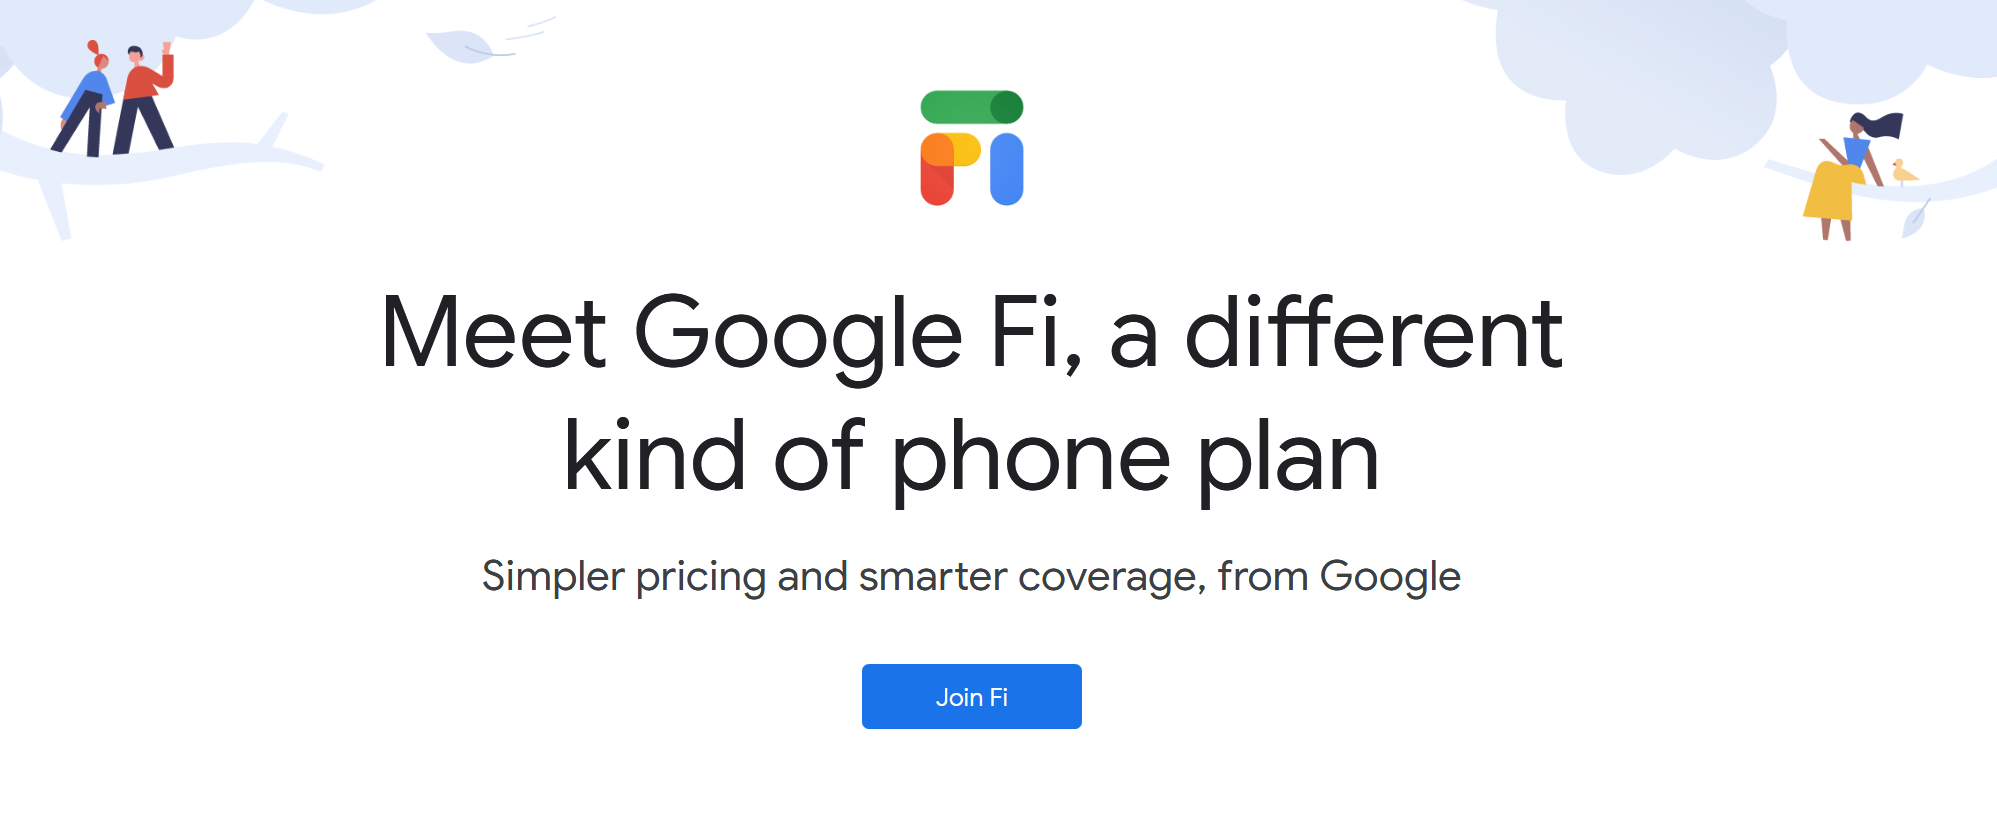 Google Fi 2 year review - should you switch?